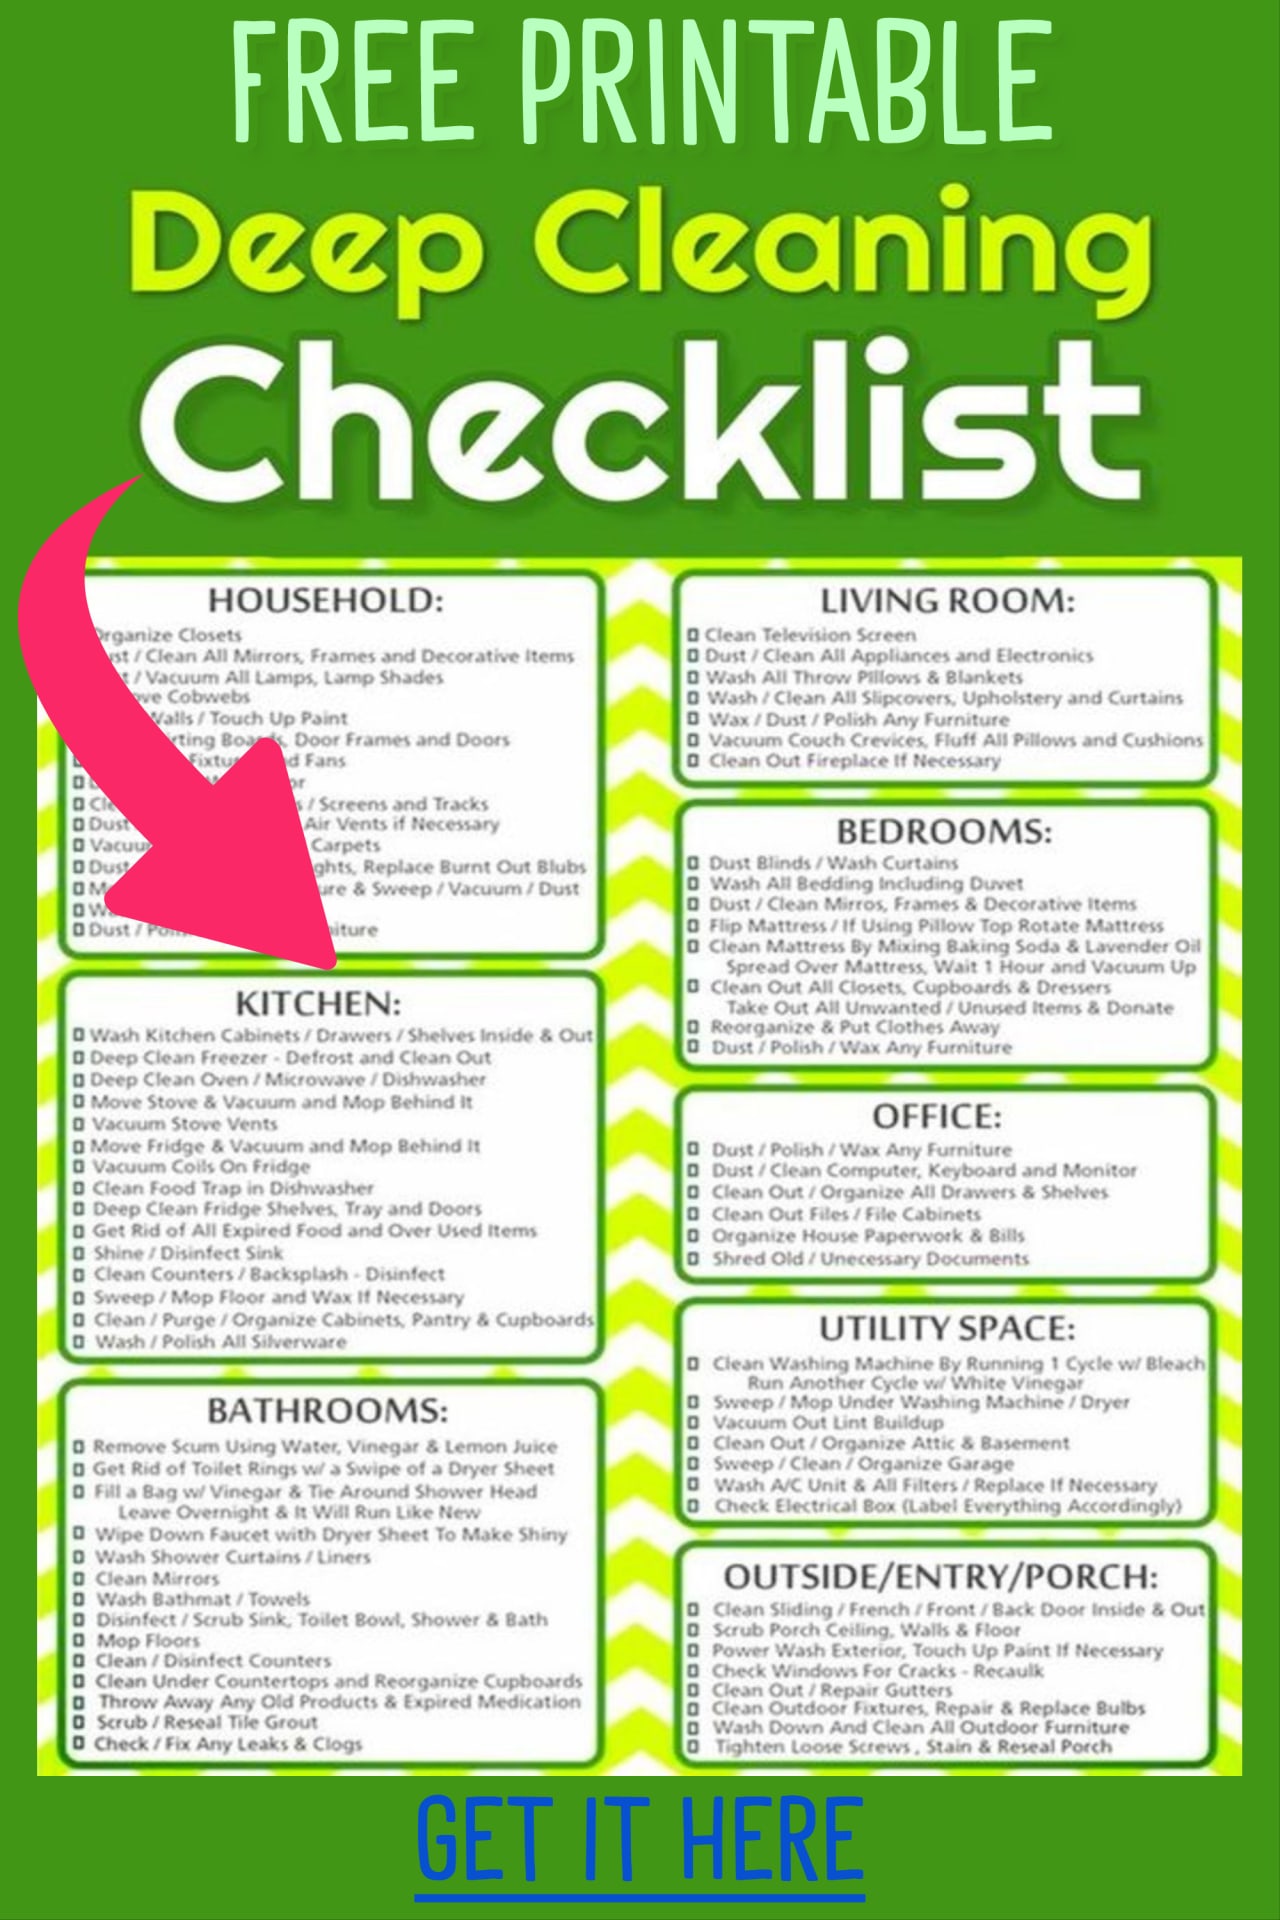 Deep cleaning schedule printable checklist - deep cleaning house checklist free printable - weekly, monthly and daily chores to keep house clean - daily cleaning routines for busy working moms